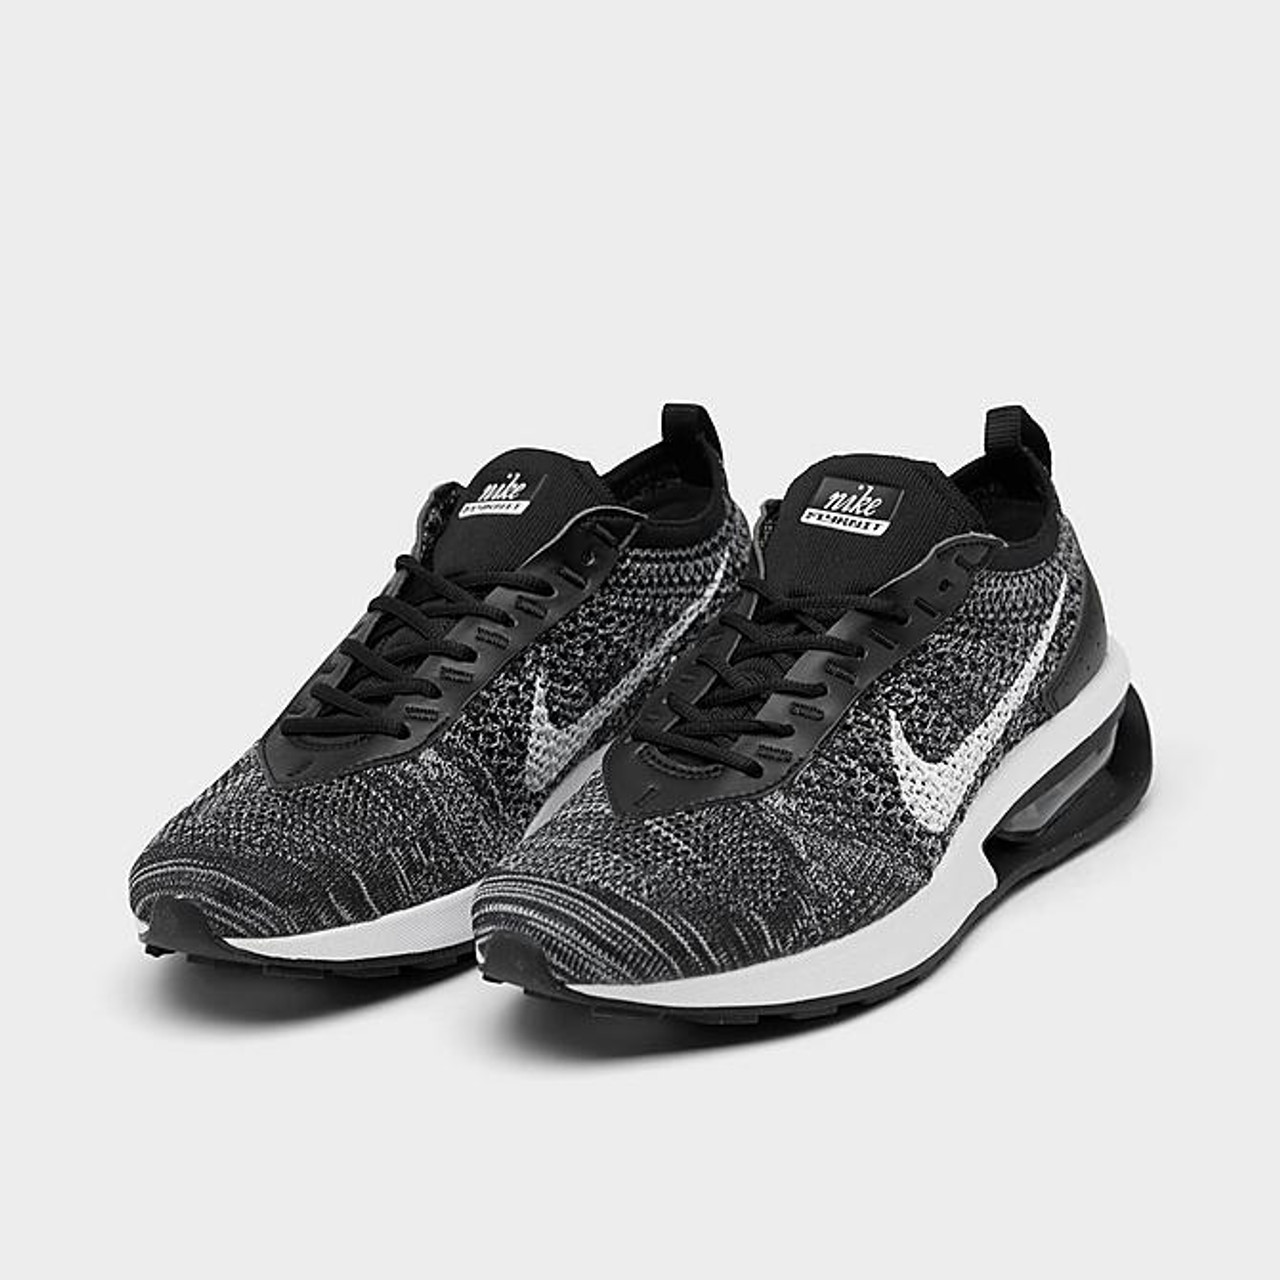 WOMEN'S NIKE AIR MAX FLYKNIT RACER SHOES